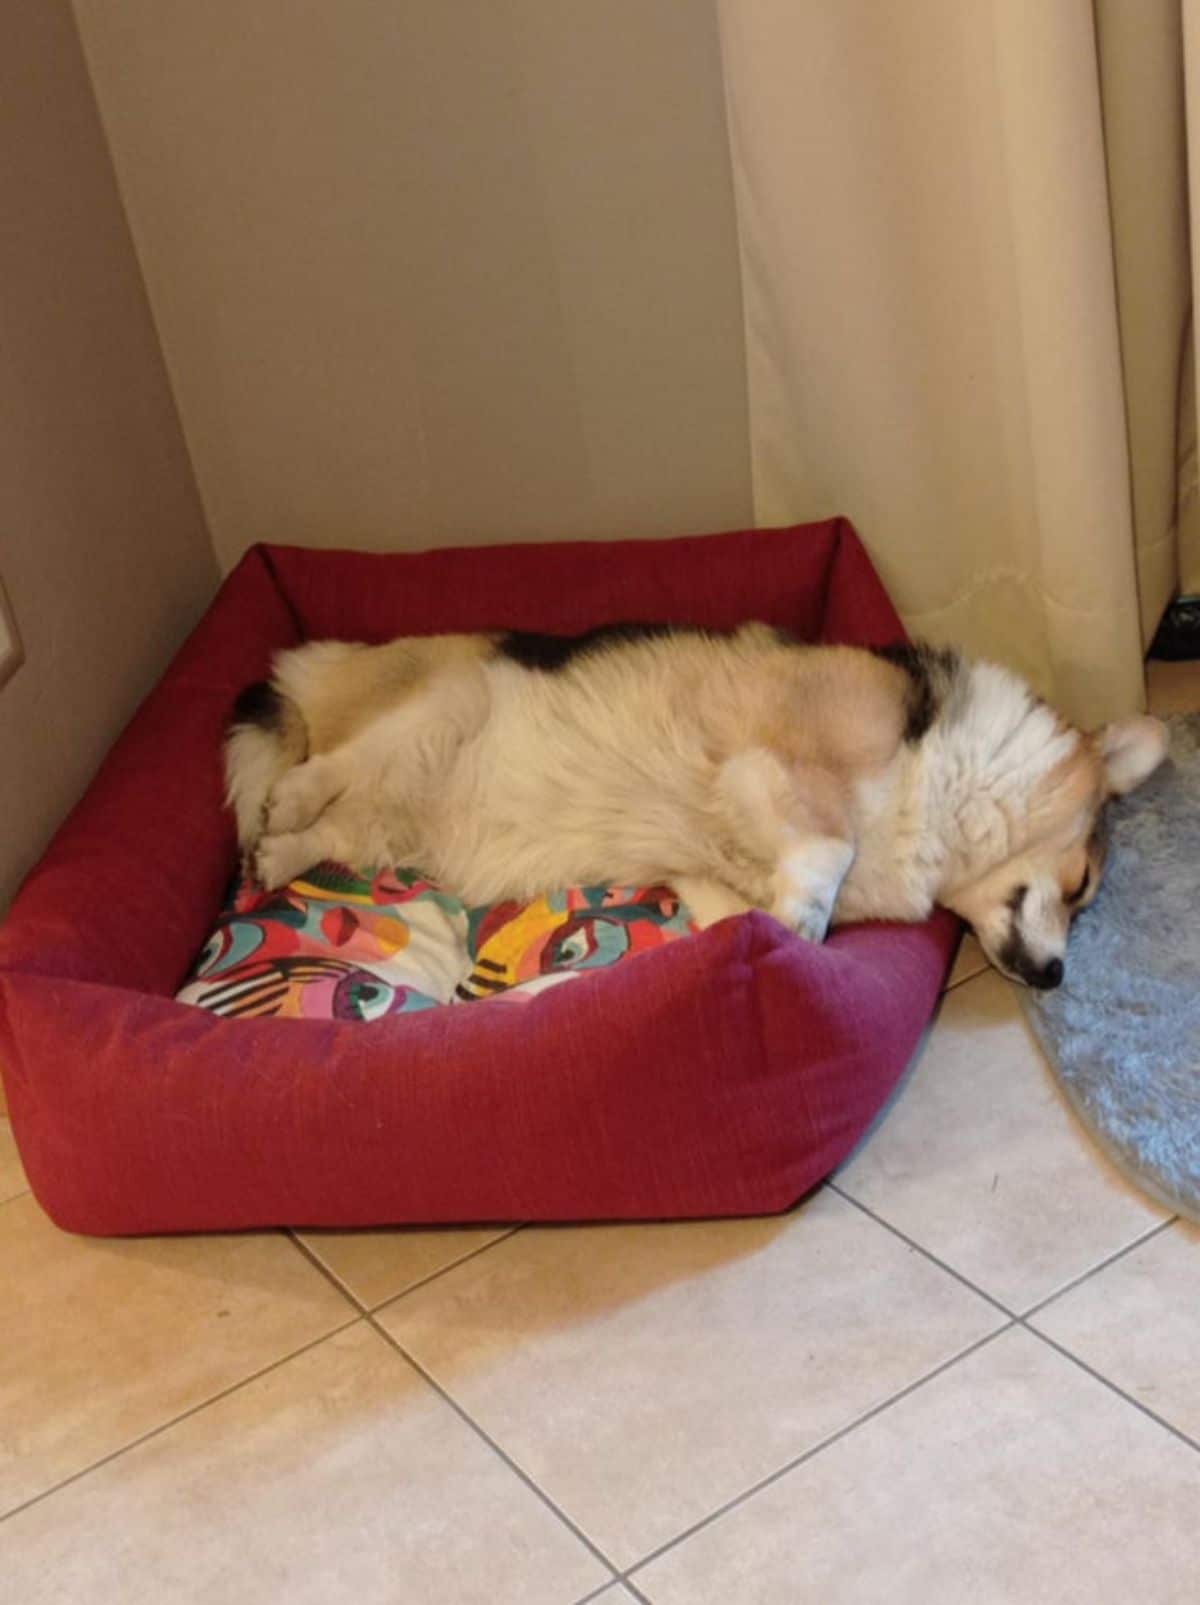 black brown and white corgi sleeping on a red dog bed with the head on the floor